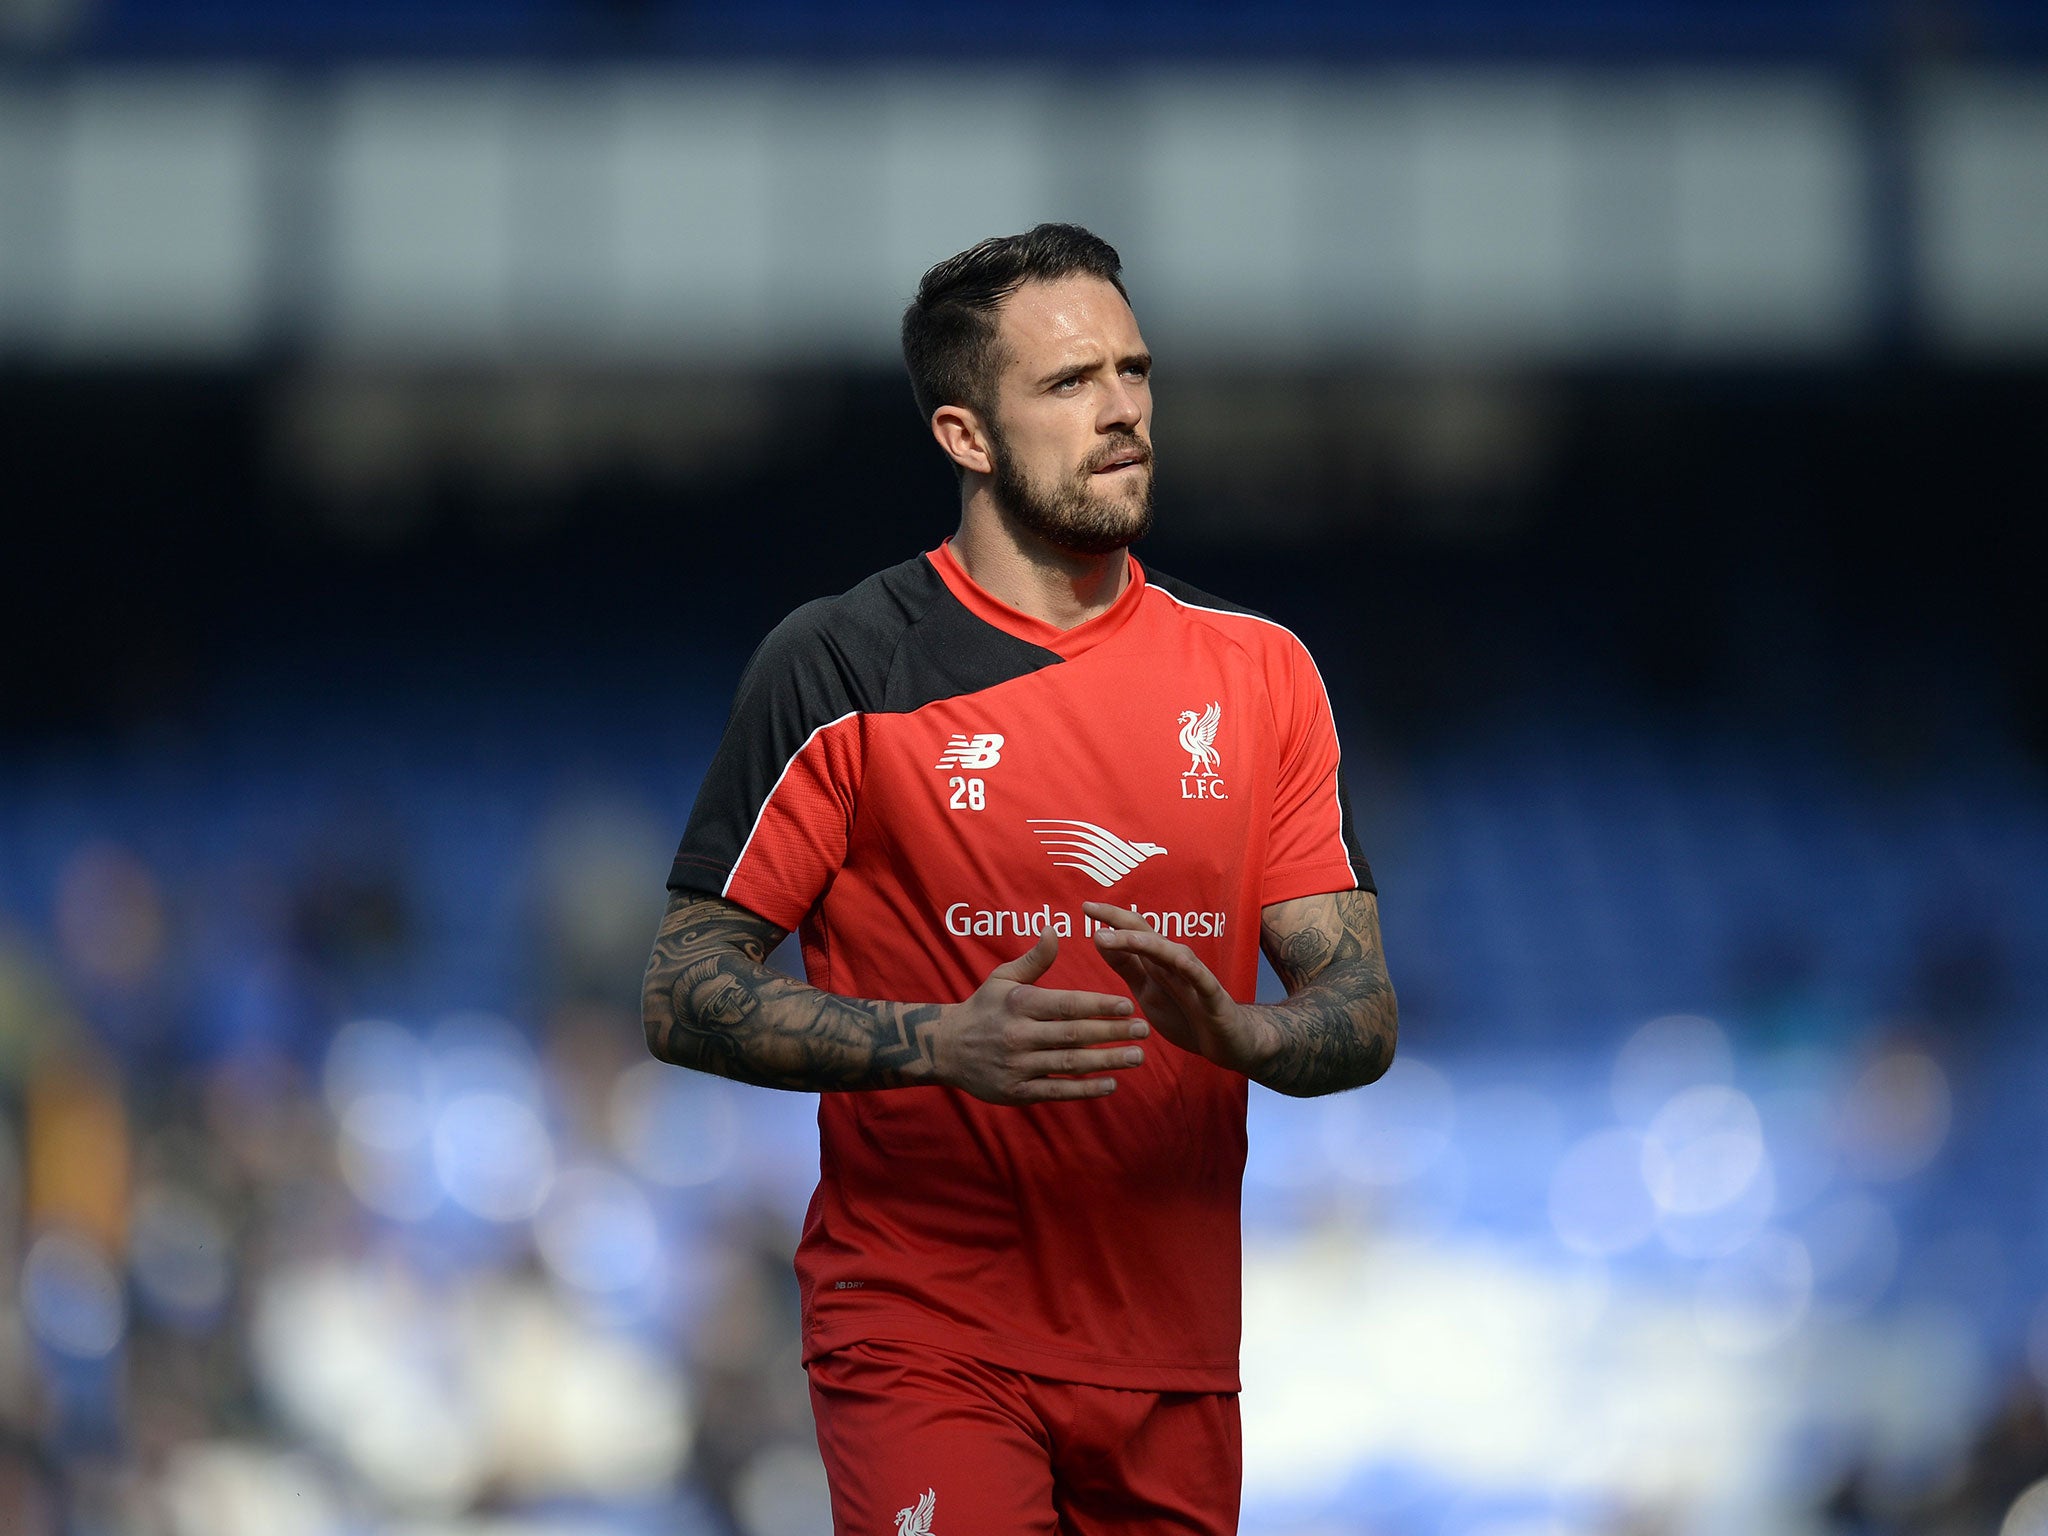 Danny Ings will miss another season of football due to injury